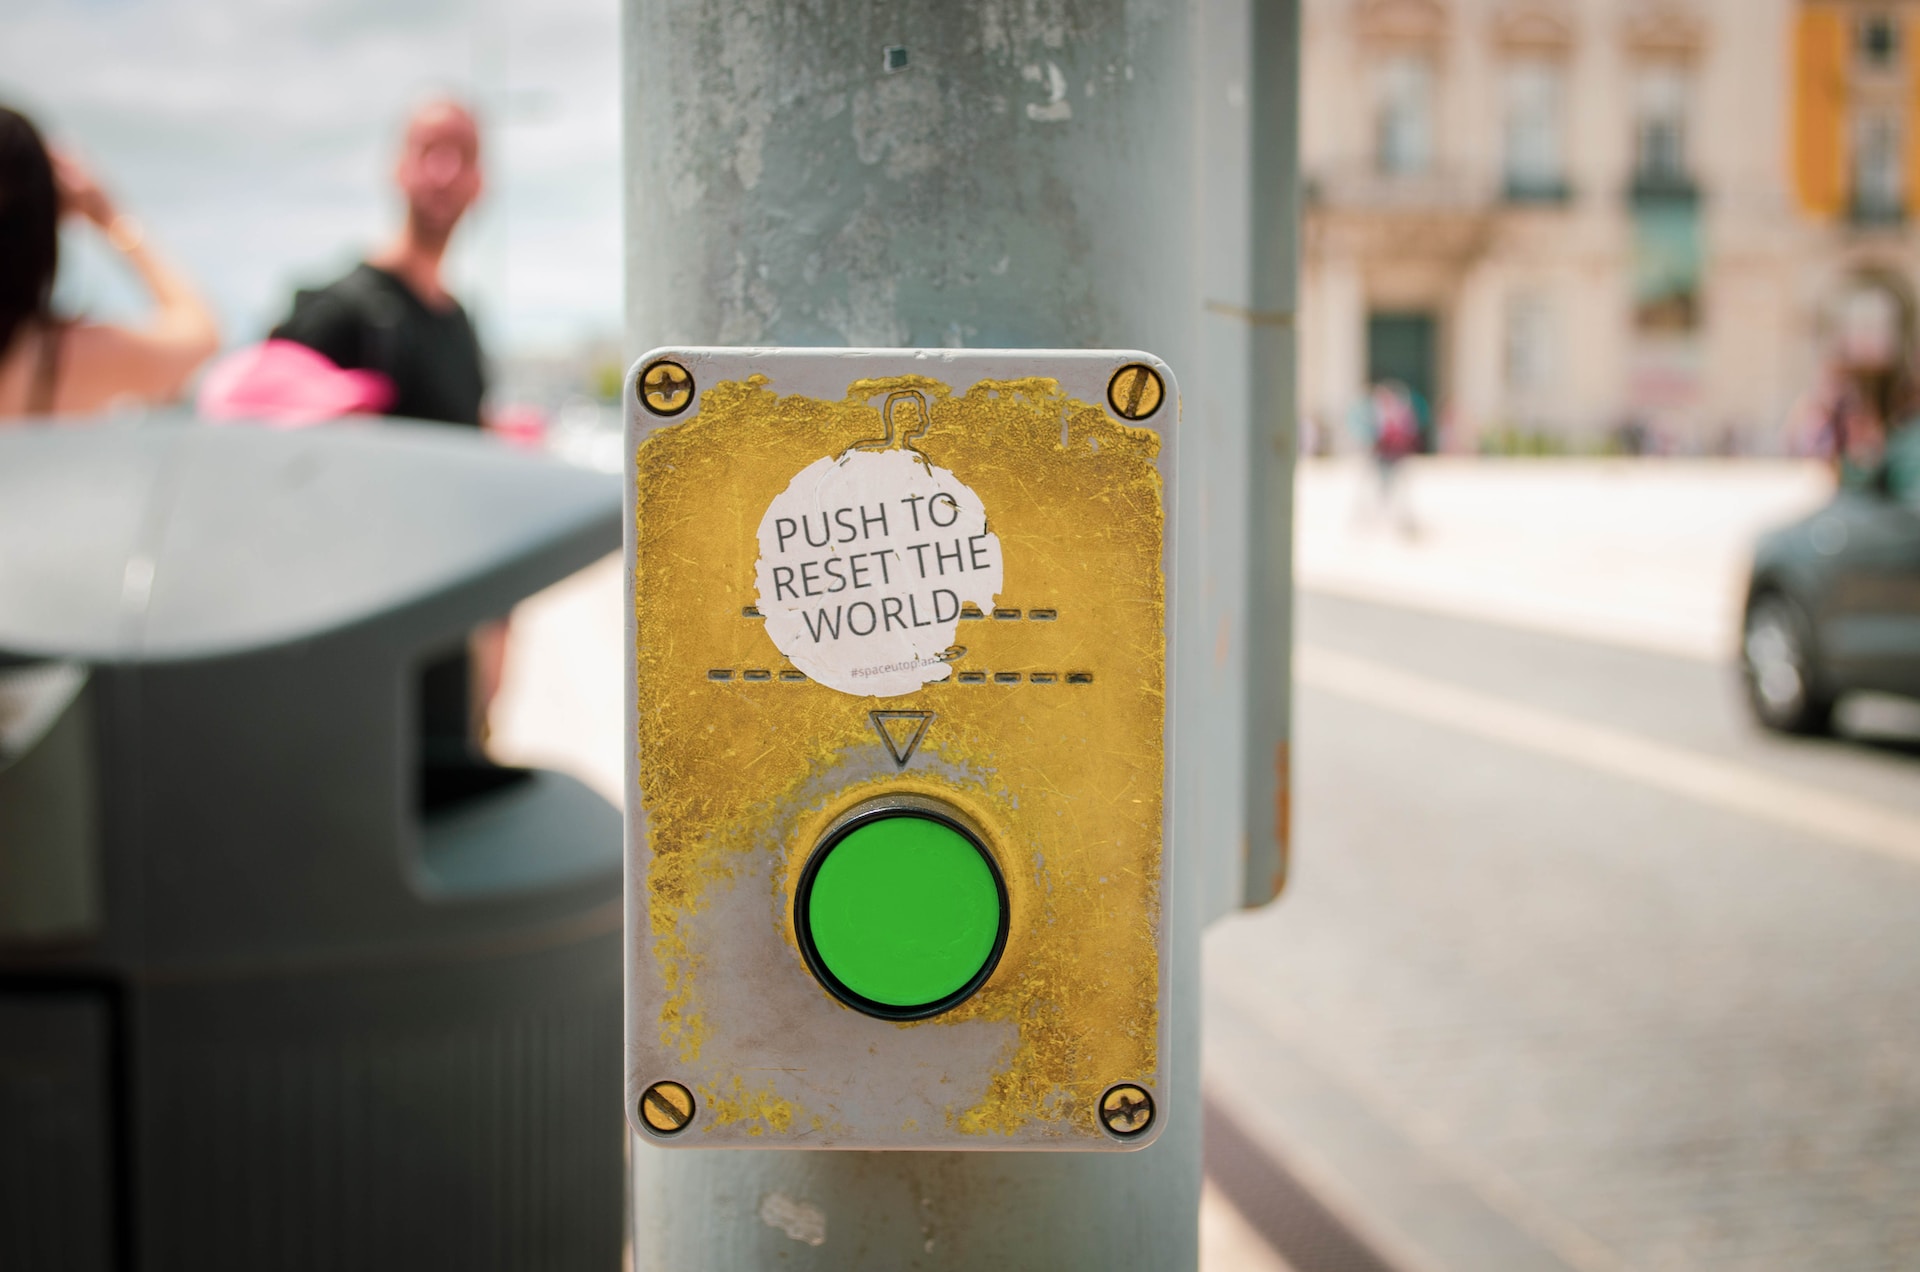 A big green reset button taped to a pole. Courtesy: Unsplash